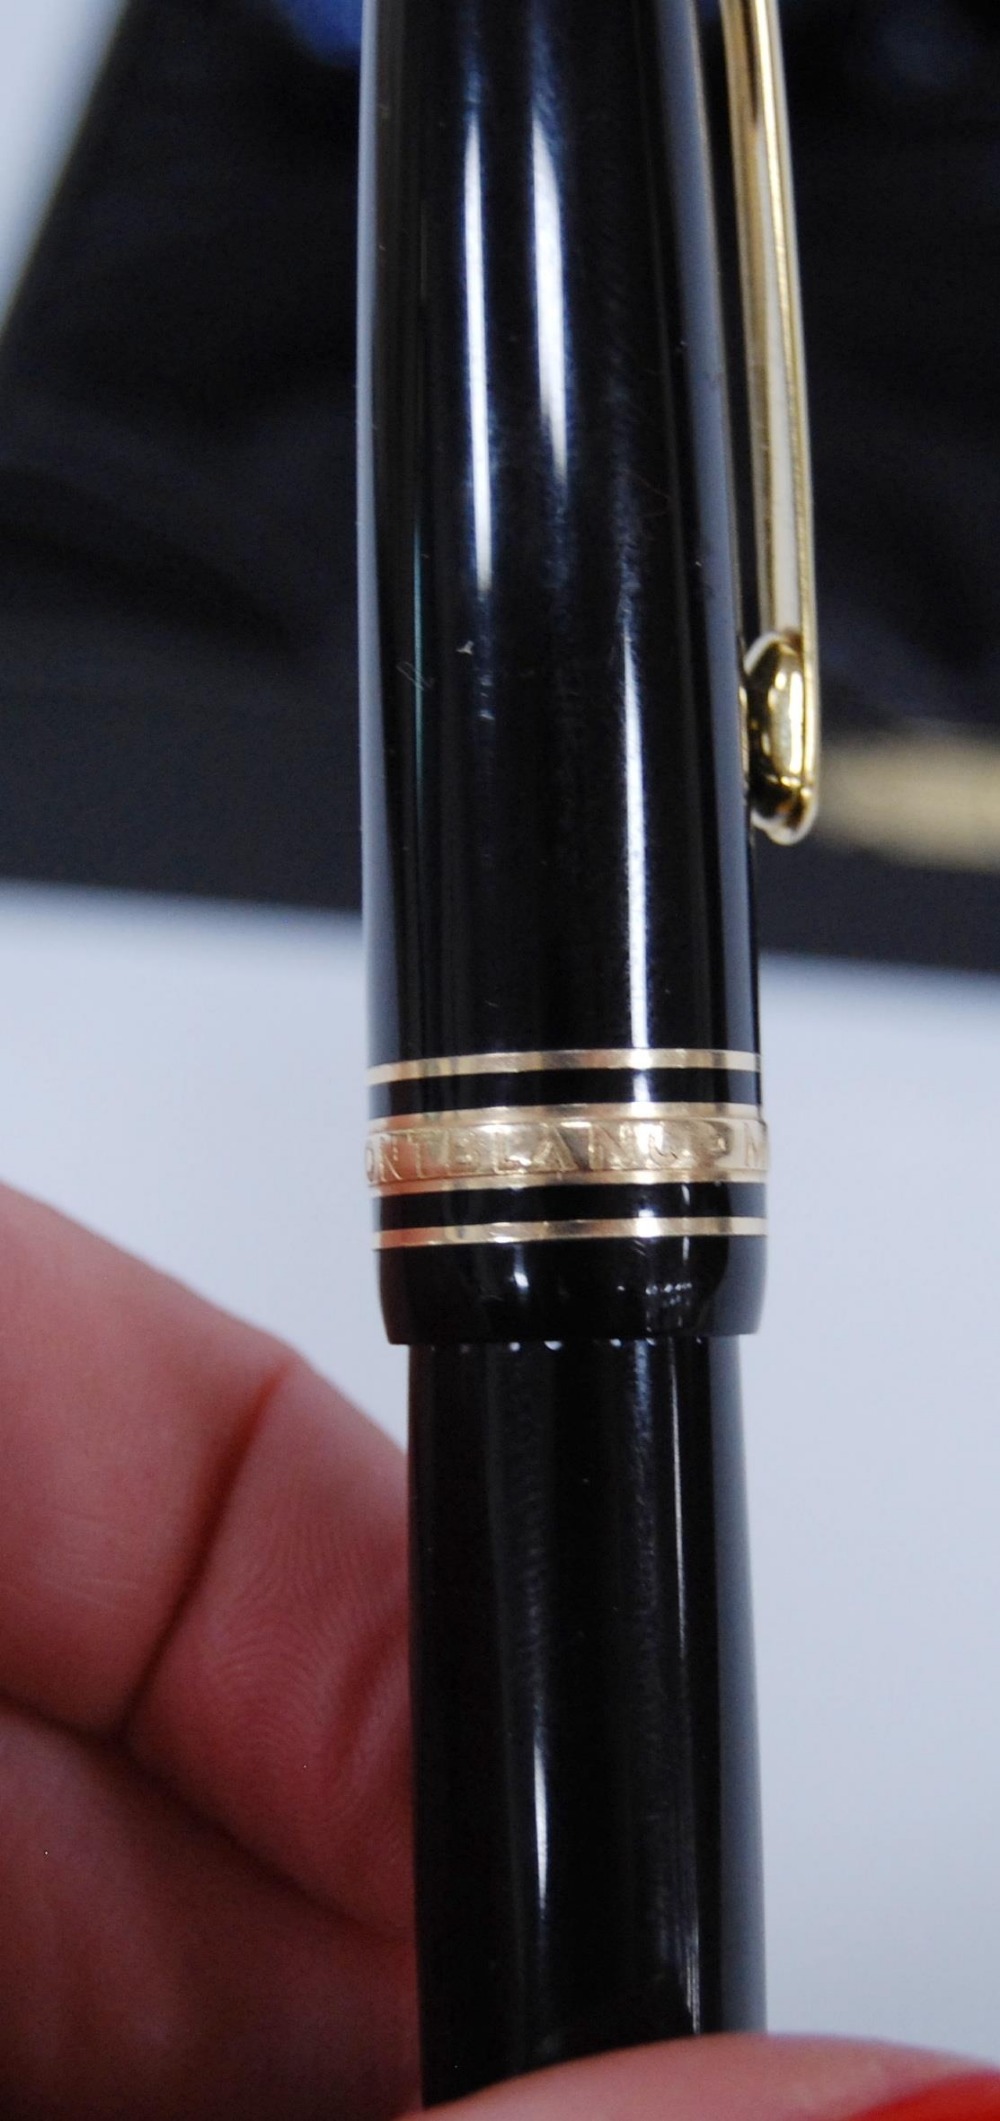 Montblanc Meisterstück fountain pen with 14ct gold nib, no. 4810, with Montblanc ink bottle and - Image 3 of 12